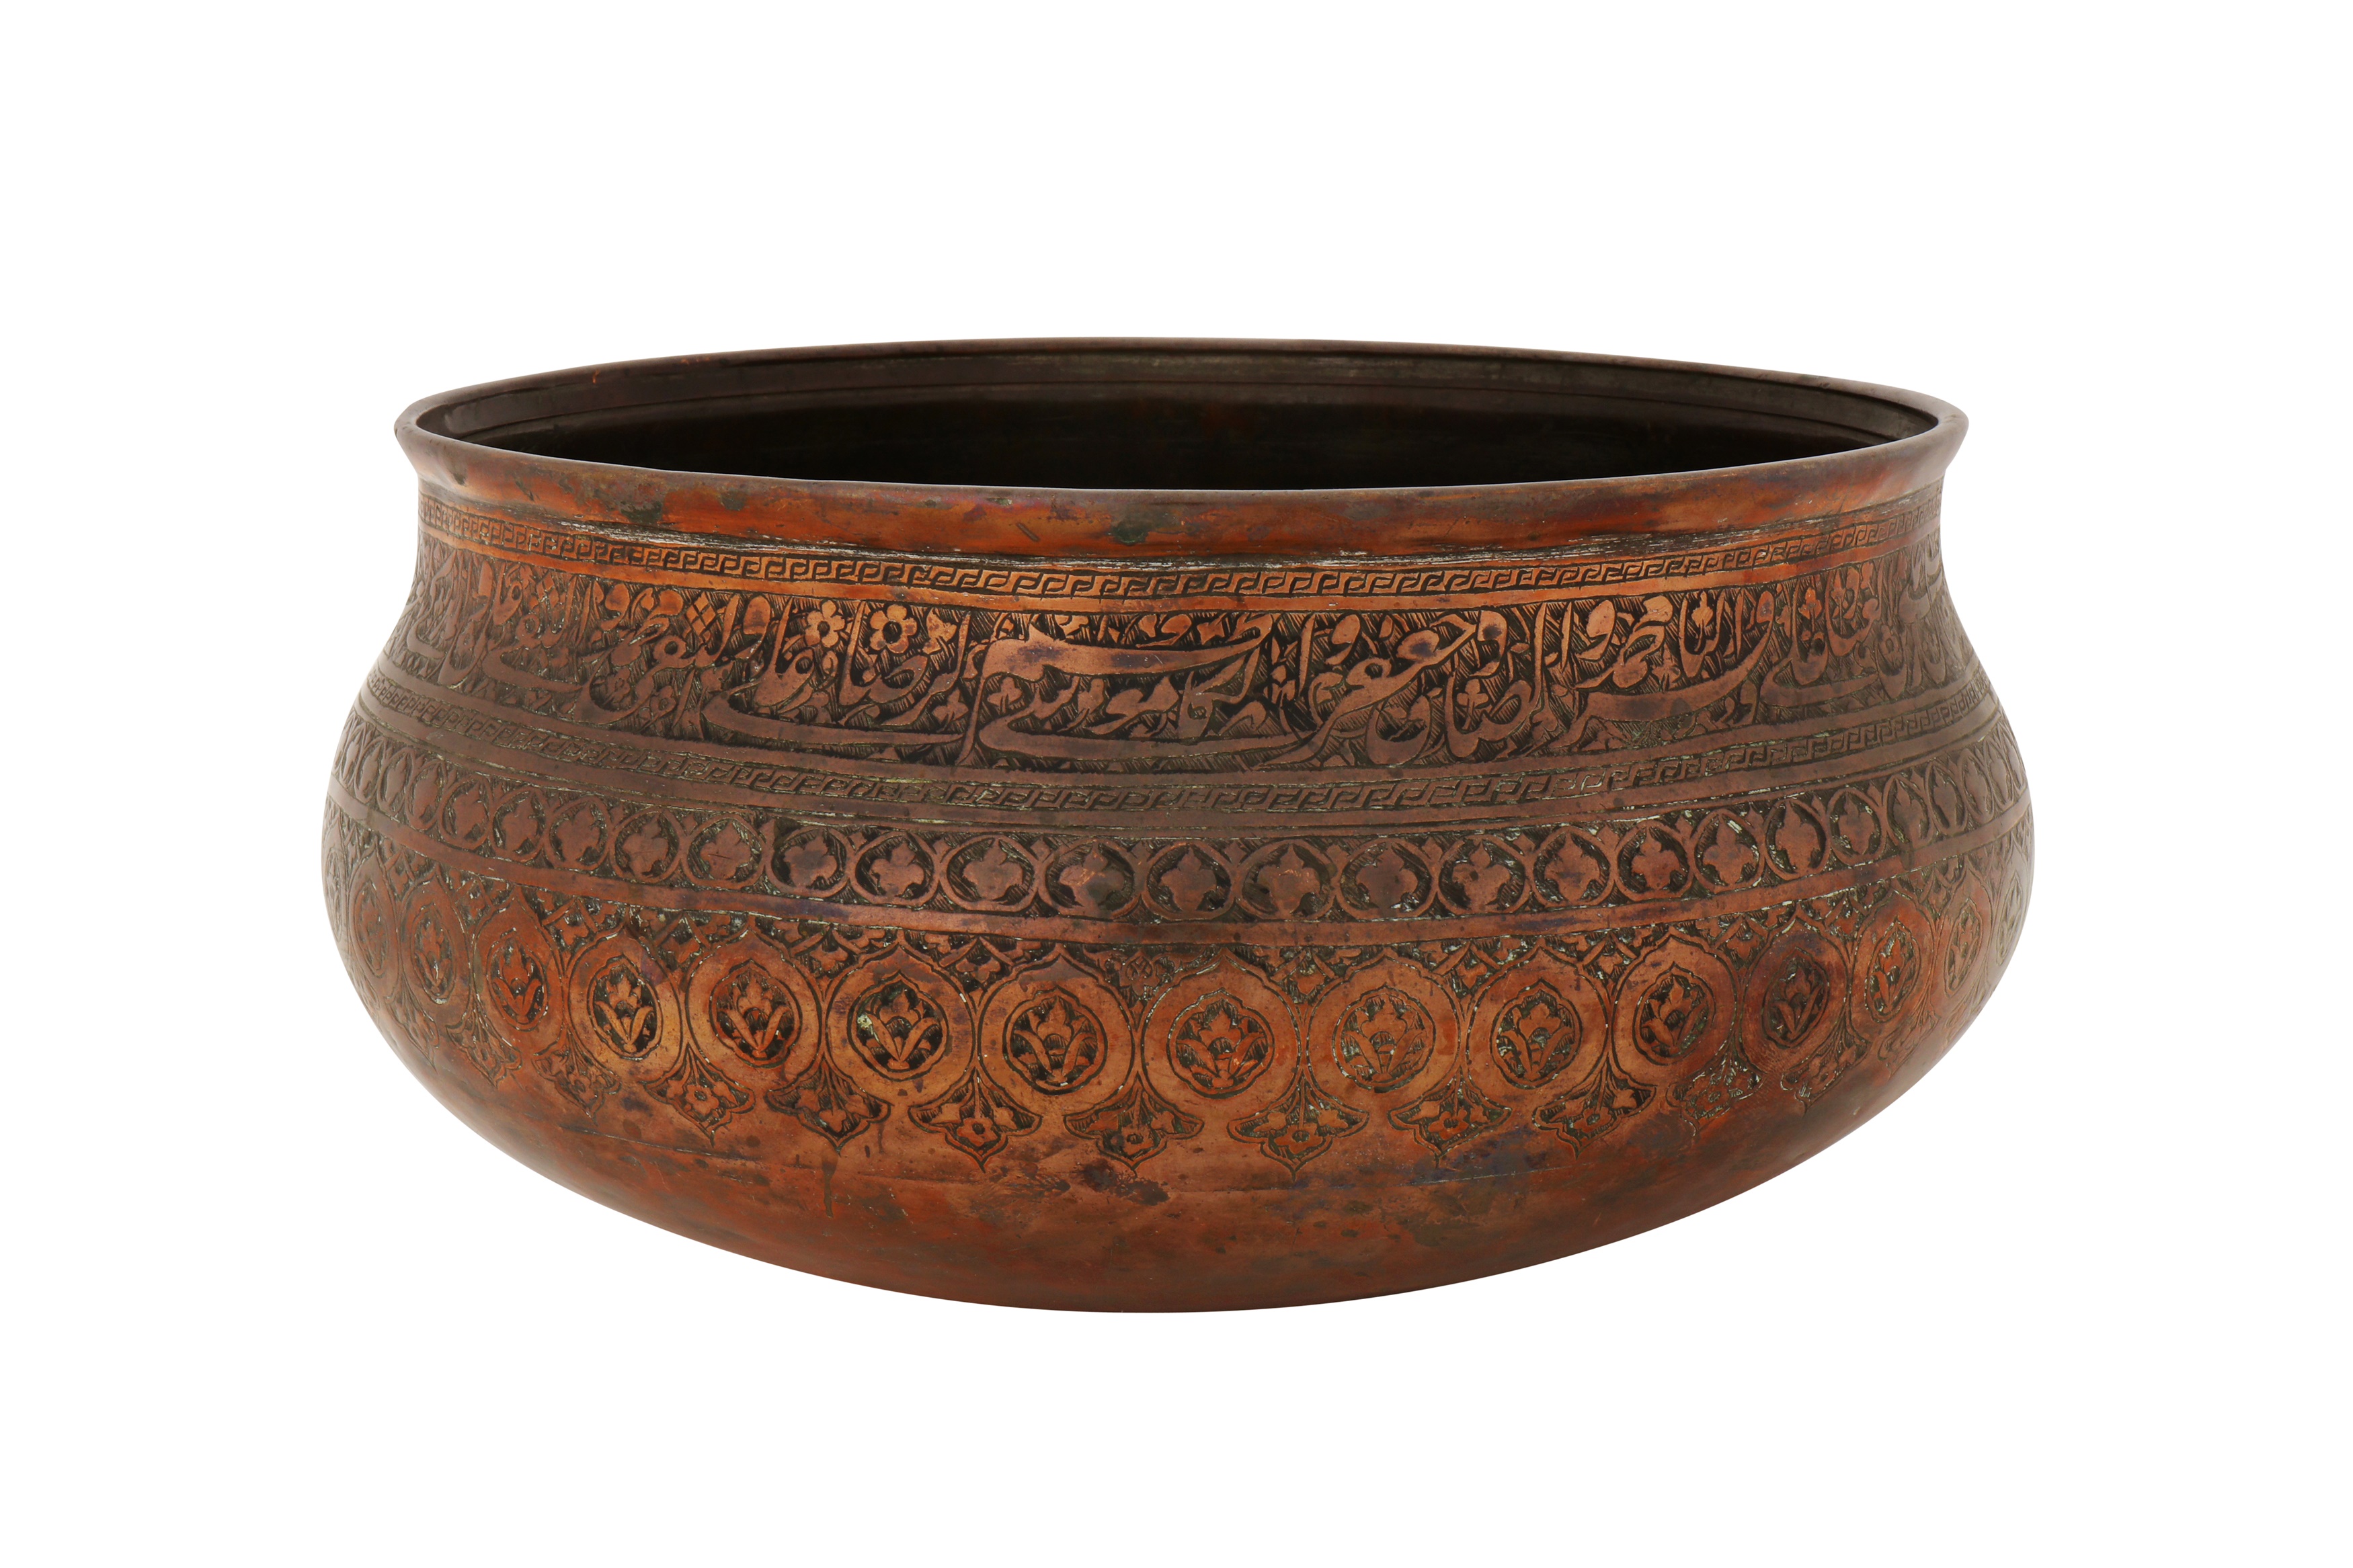 A 17TH CENTURY SAFAVID ENGRAVED TINNED COPPER TAS BOWL WITH THE NAMES OF THE 12 SHI'A IMAMS - Image 3 of 4